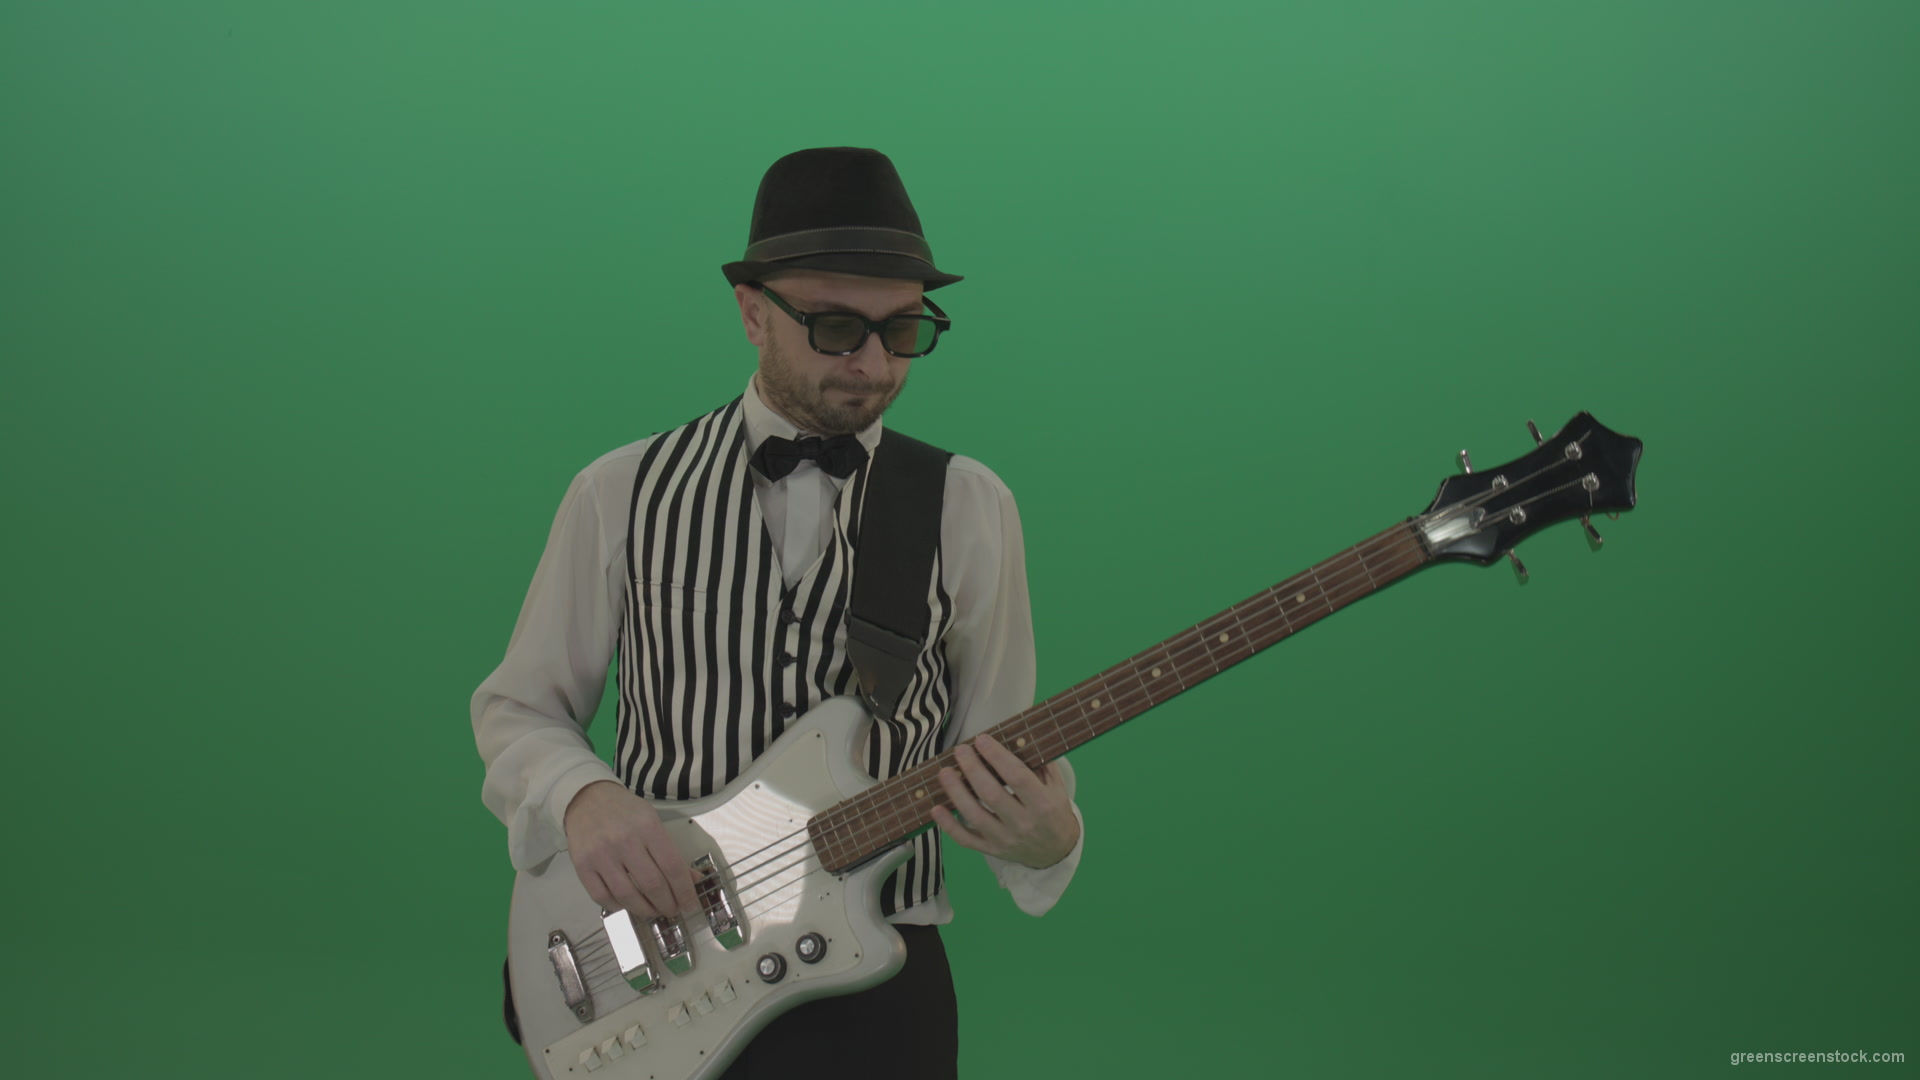 Guitar-player-browses-the-bass-guitar-playing-solo-and-charismatically-shows-facial-expressions_007 Green Screen Stock